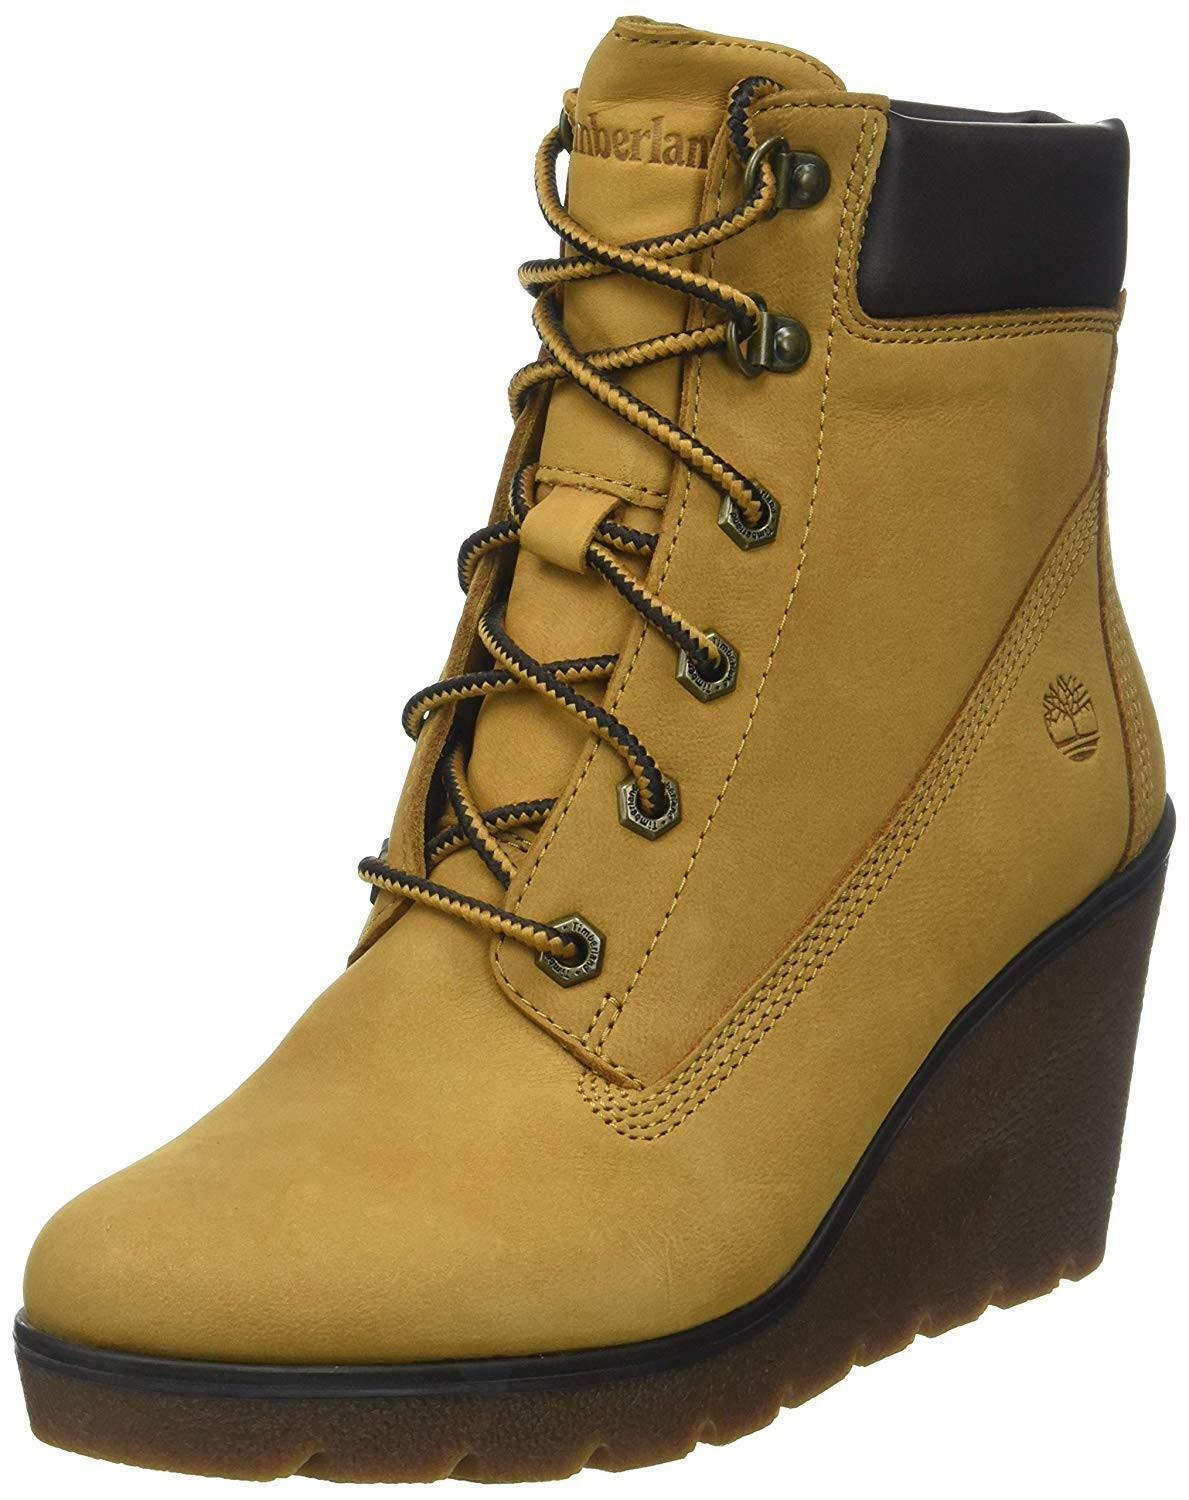 timberland con zeppa Shop Clothing \u0026 Shoes Online